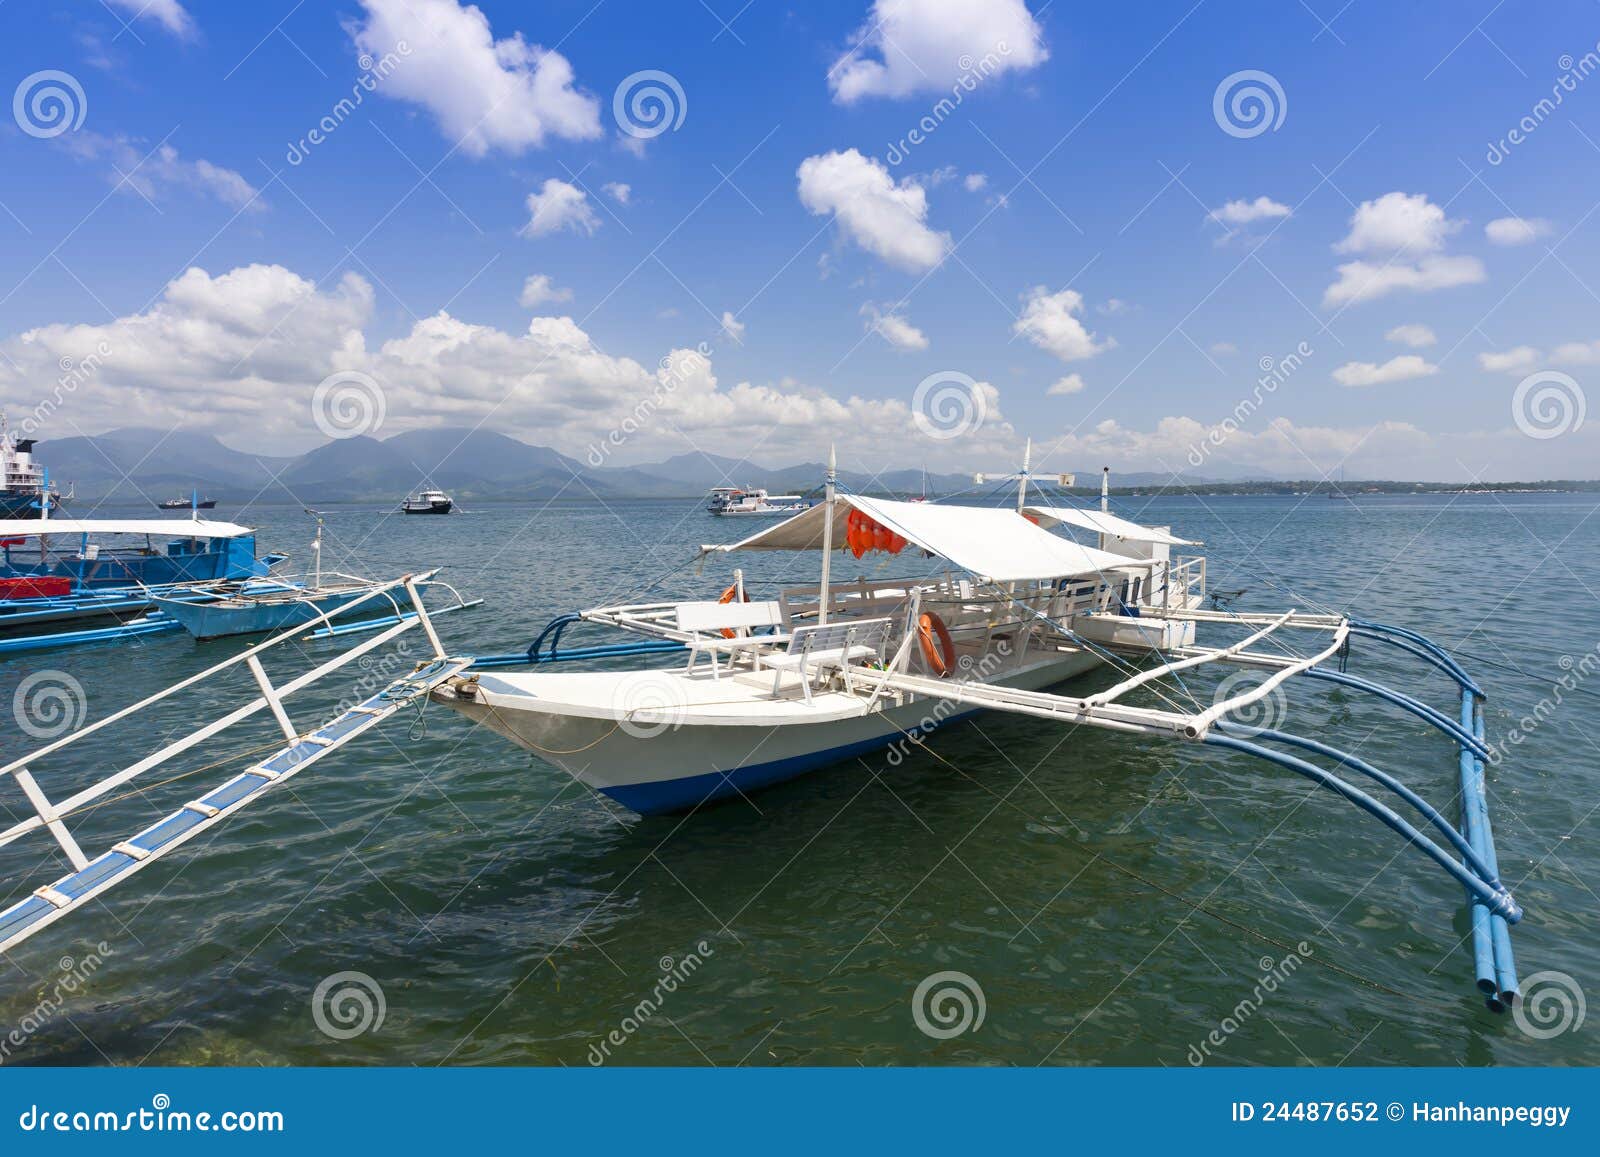 Boat Plans http://www.dreamstime.com/stock-photography-banca-boat 